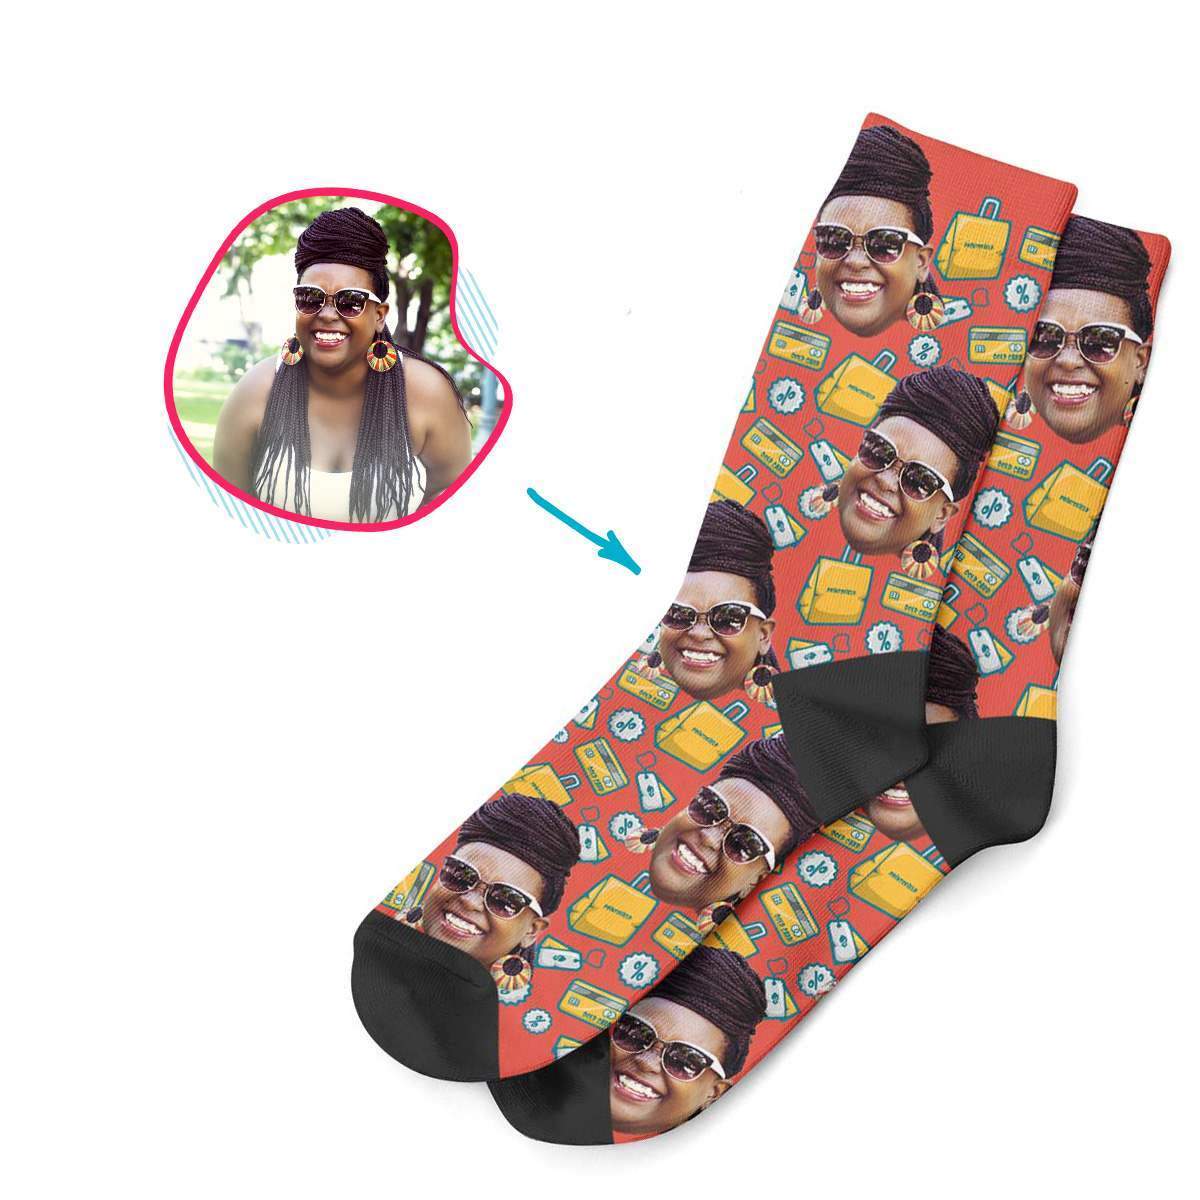 red Shopping socks personalized with photo of face printed on them